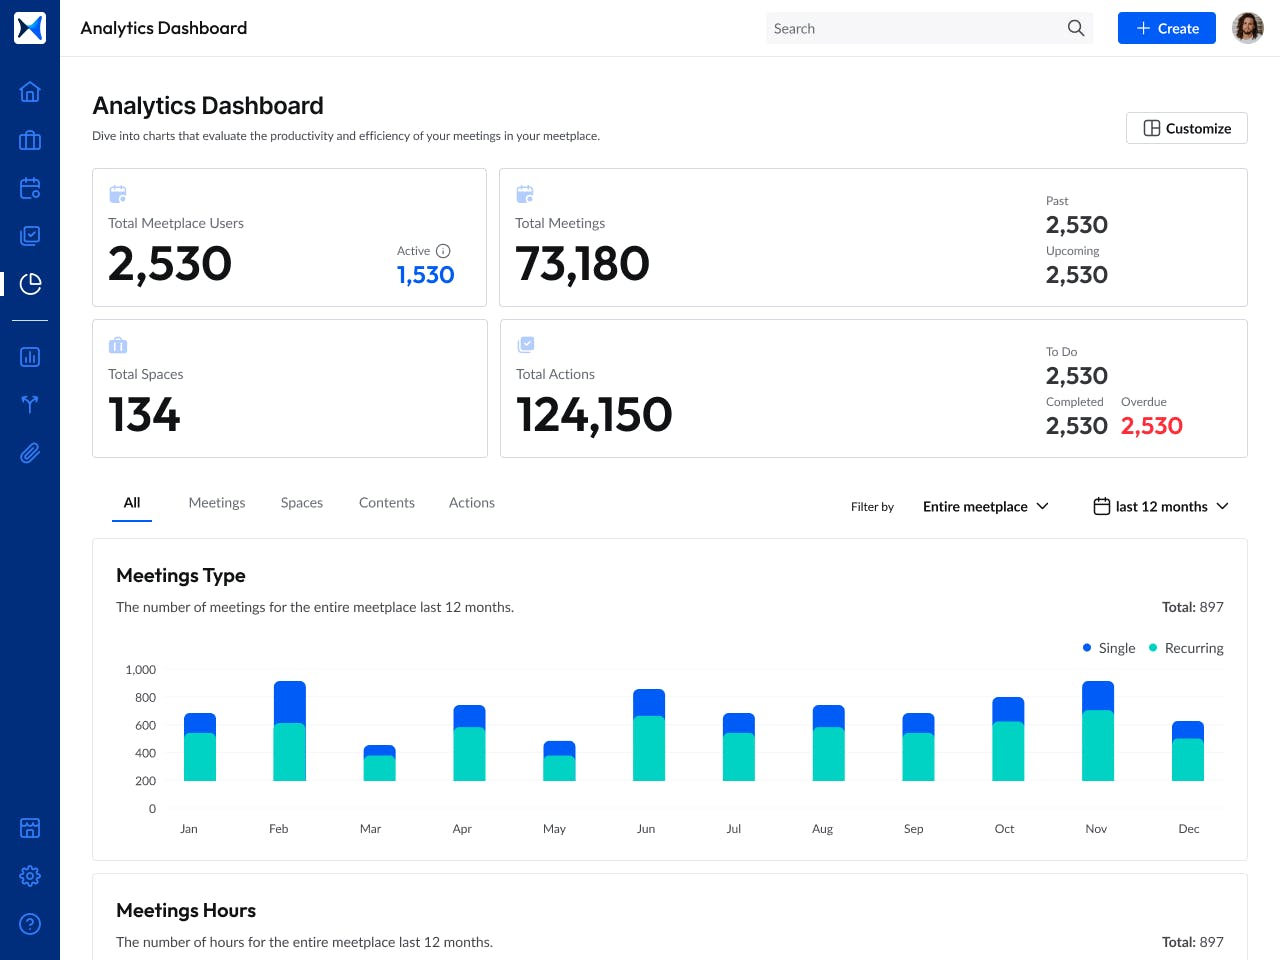 View analytics dashboard for meeting insights